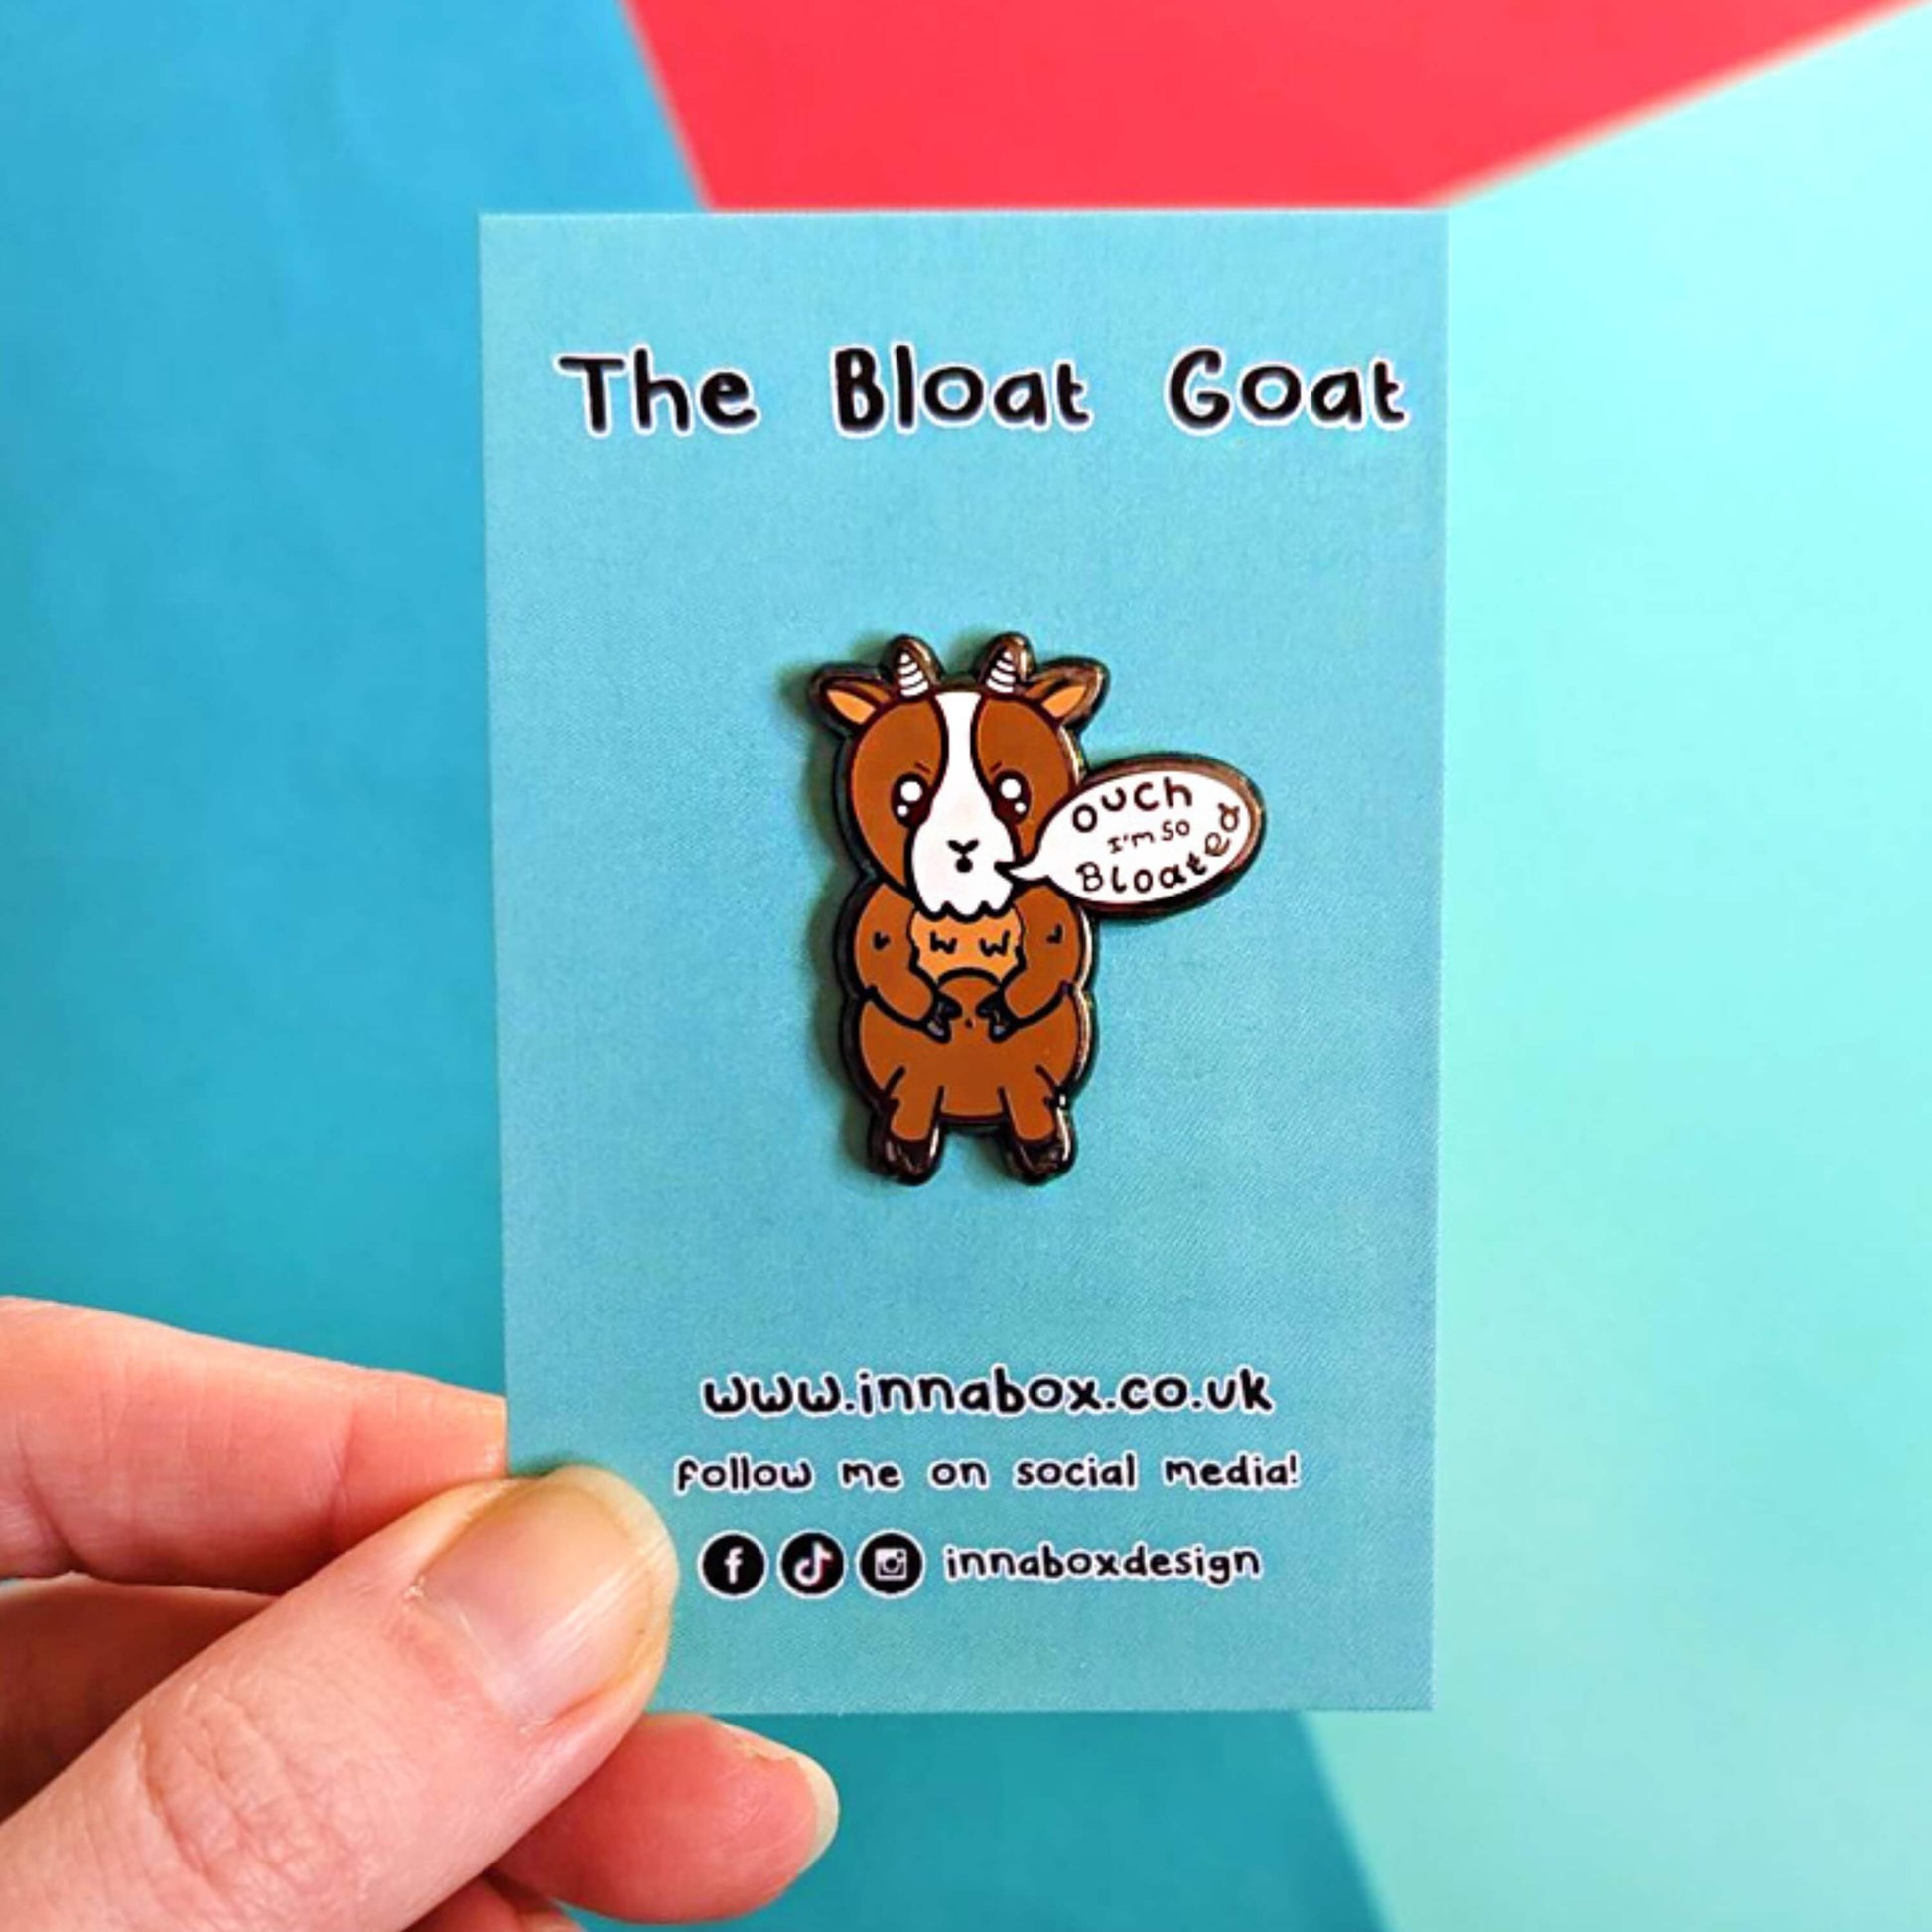 The Bloat Goat Enamel Pin on its blue backing card being held over a blue and red background. The brown frustrated goat pin badge is stood up clutching its tummy with a speech bubble reading 'ouch I'm so bloated'. The hand drawn design is raising awareness for chronic illnesses or hidden disabilities that cause bloating.